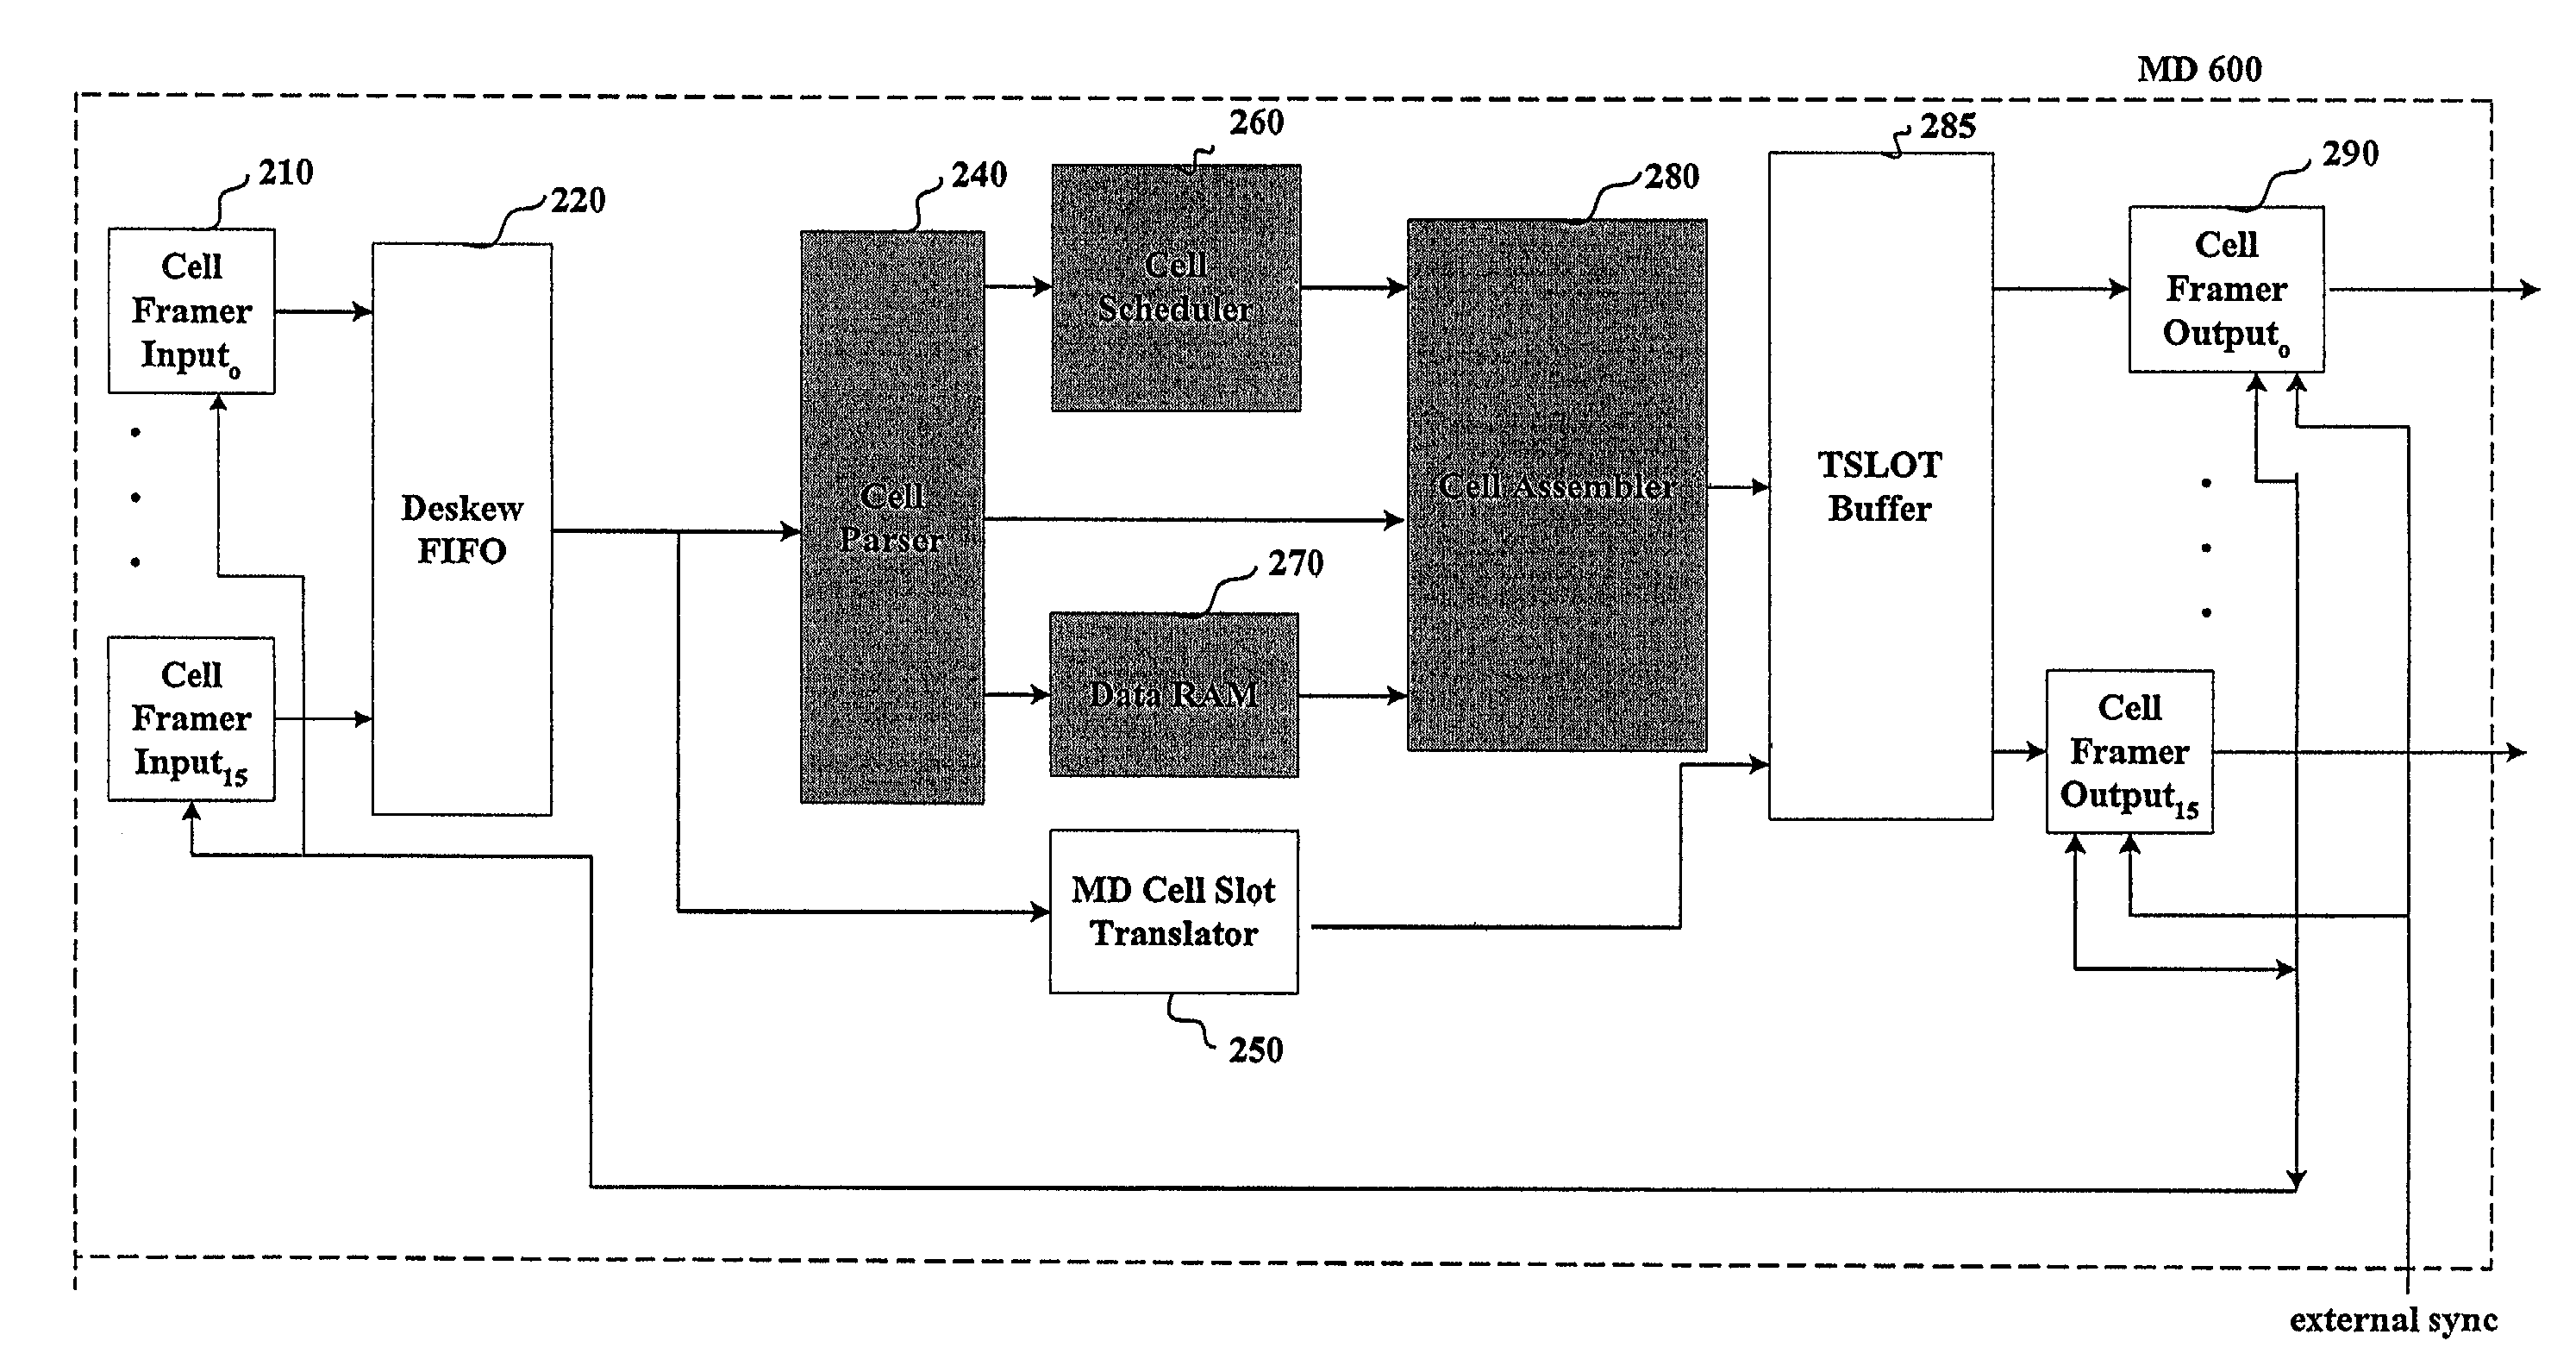 Apparatus and method for a fault-tolerant scalable switch fabric with quality-of-service (QOS) support